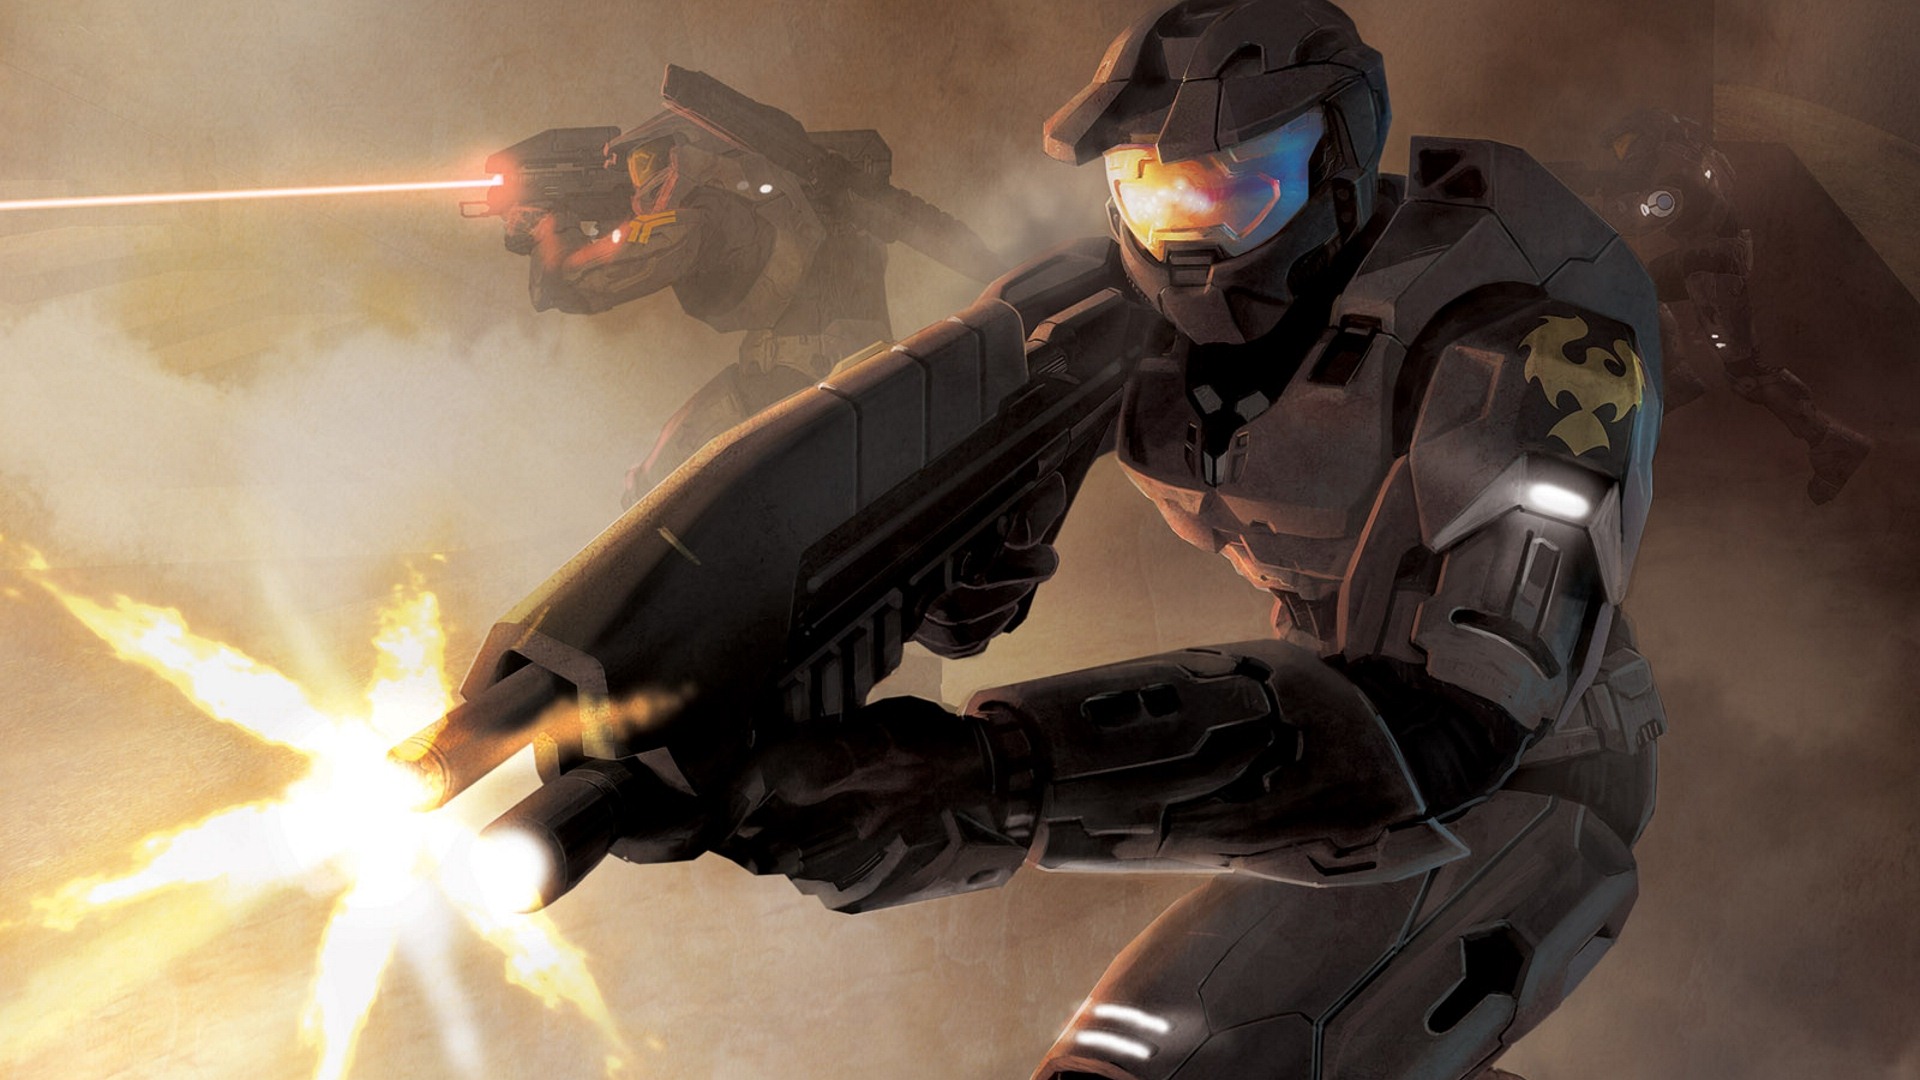 Halo game HD wallpapers #10 - 1920x1080